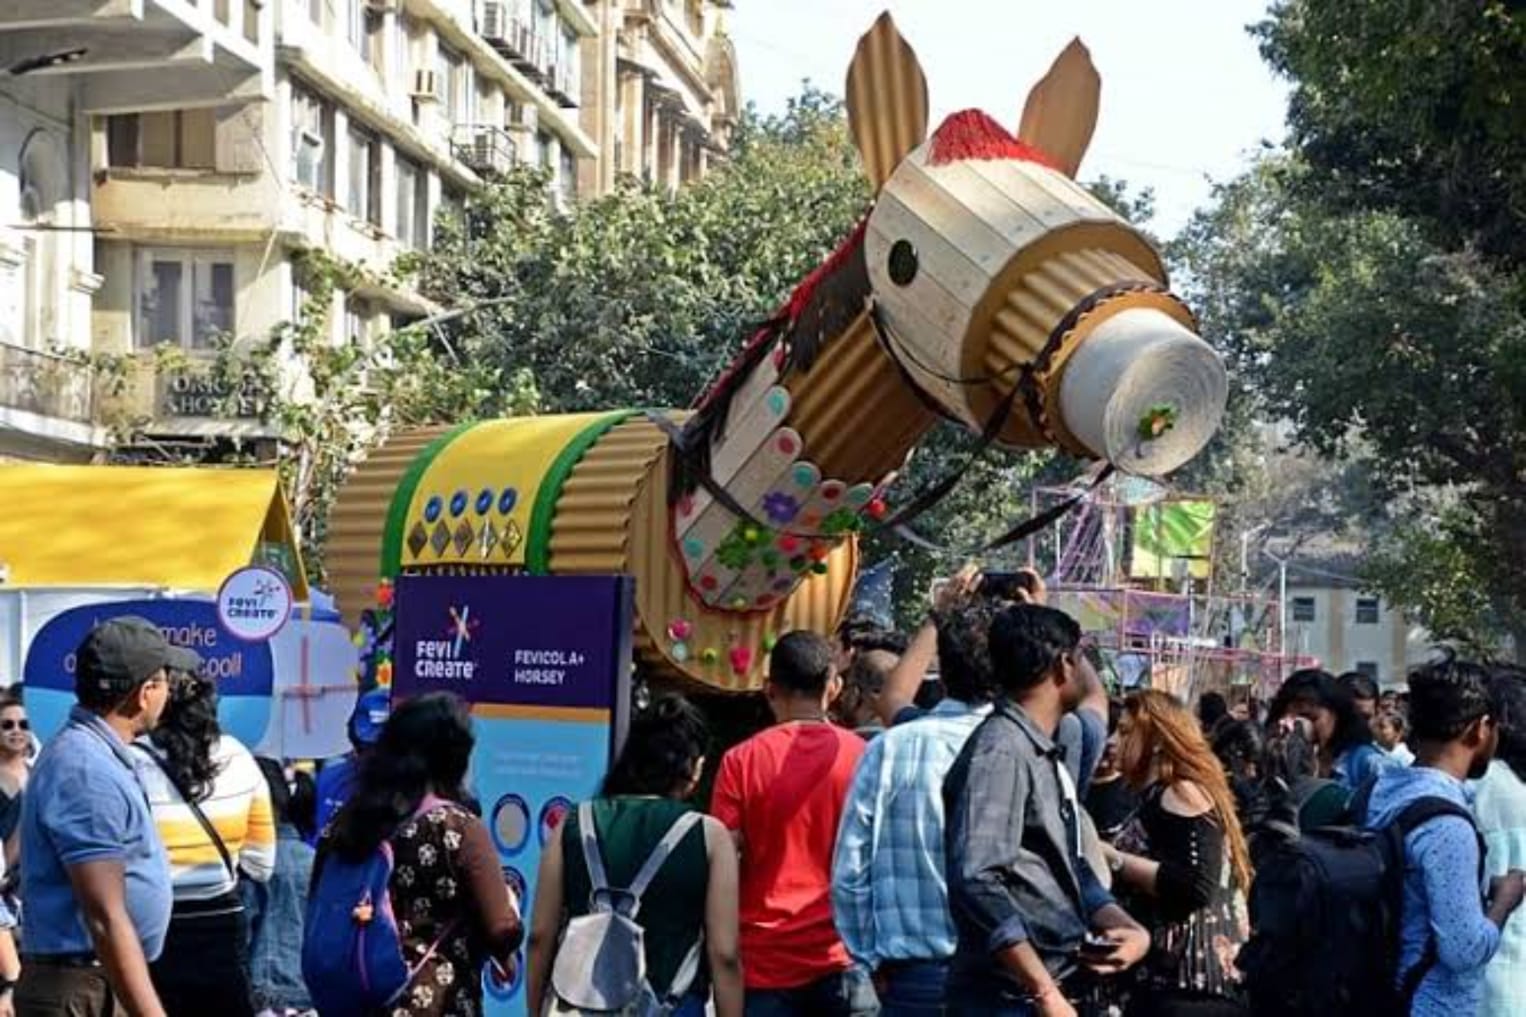 Kala Ghoda Art Festival near hotels near Marine Drive, featuring vibrant artworks, cultural performances, and a lively atmosphere